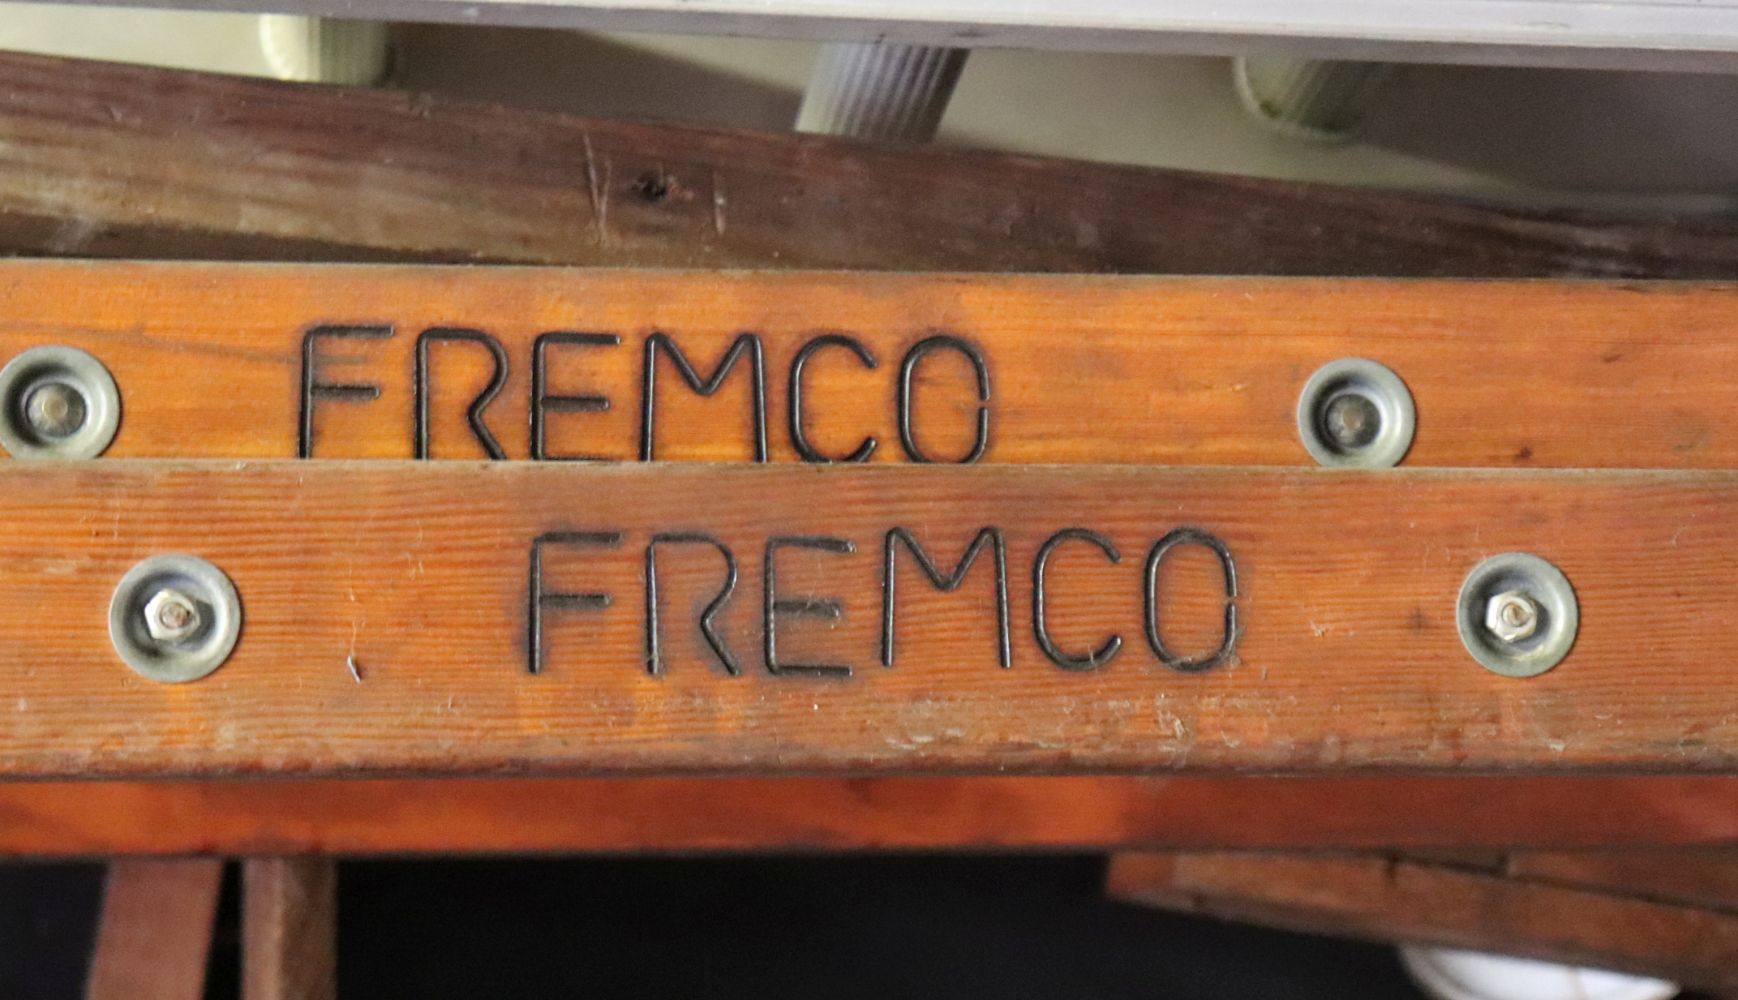 Fremco Electric, Inc. - Day 1 - Owner retired after 50 years.